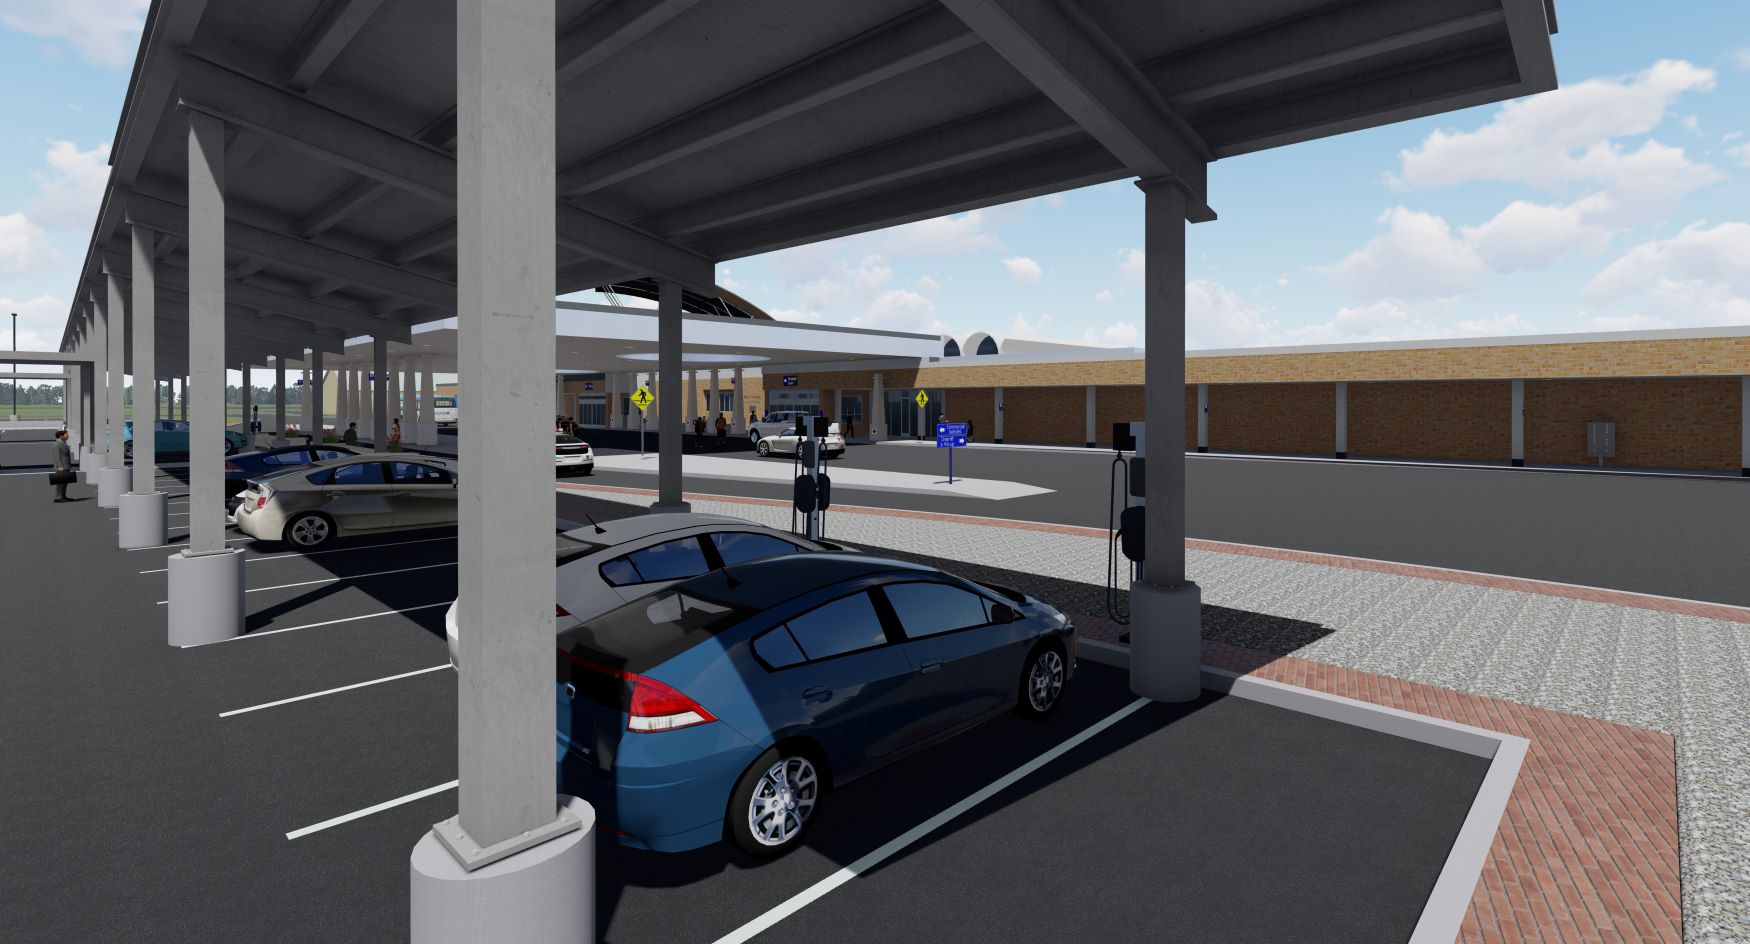 Rendering of solar-covered parking and EV charging stations proposed at RST.